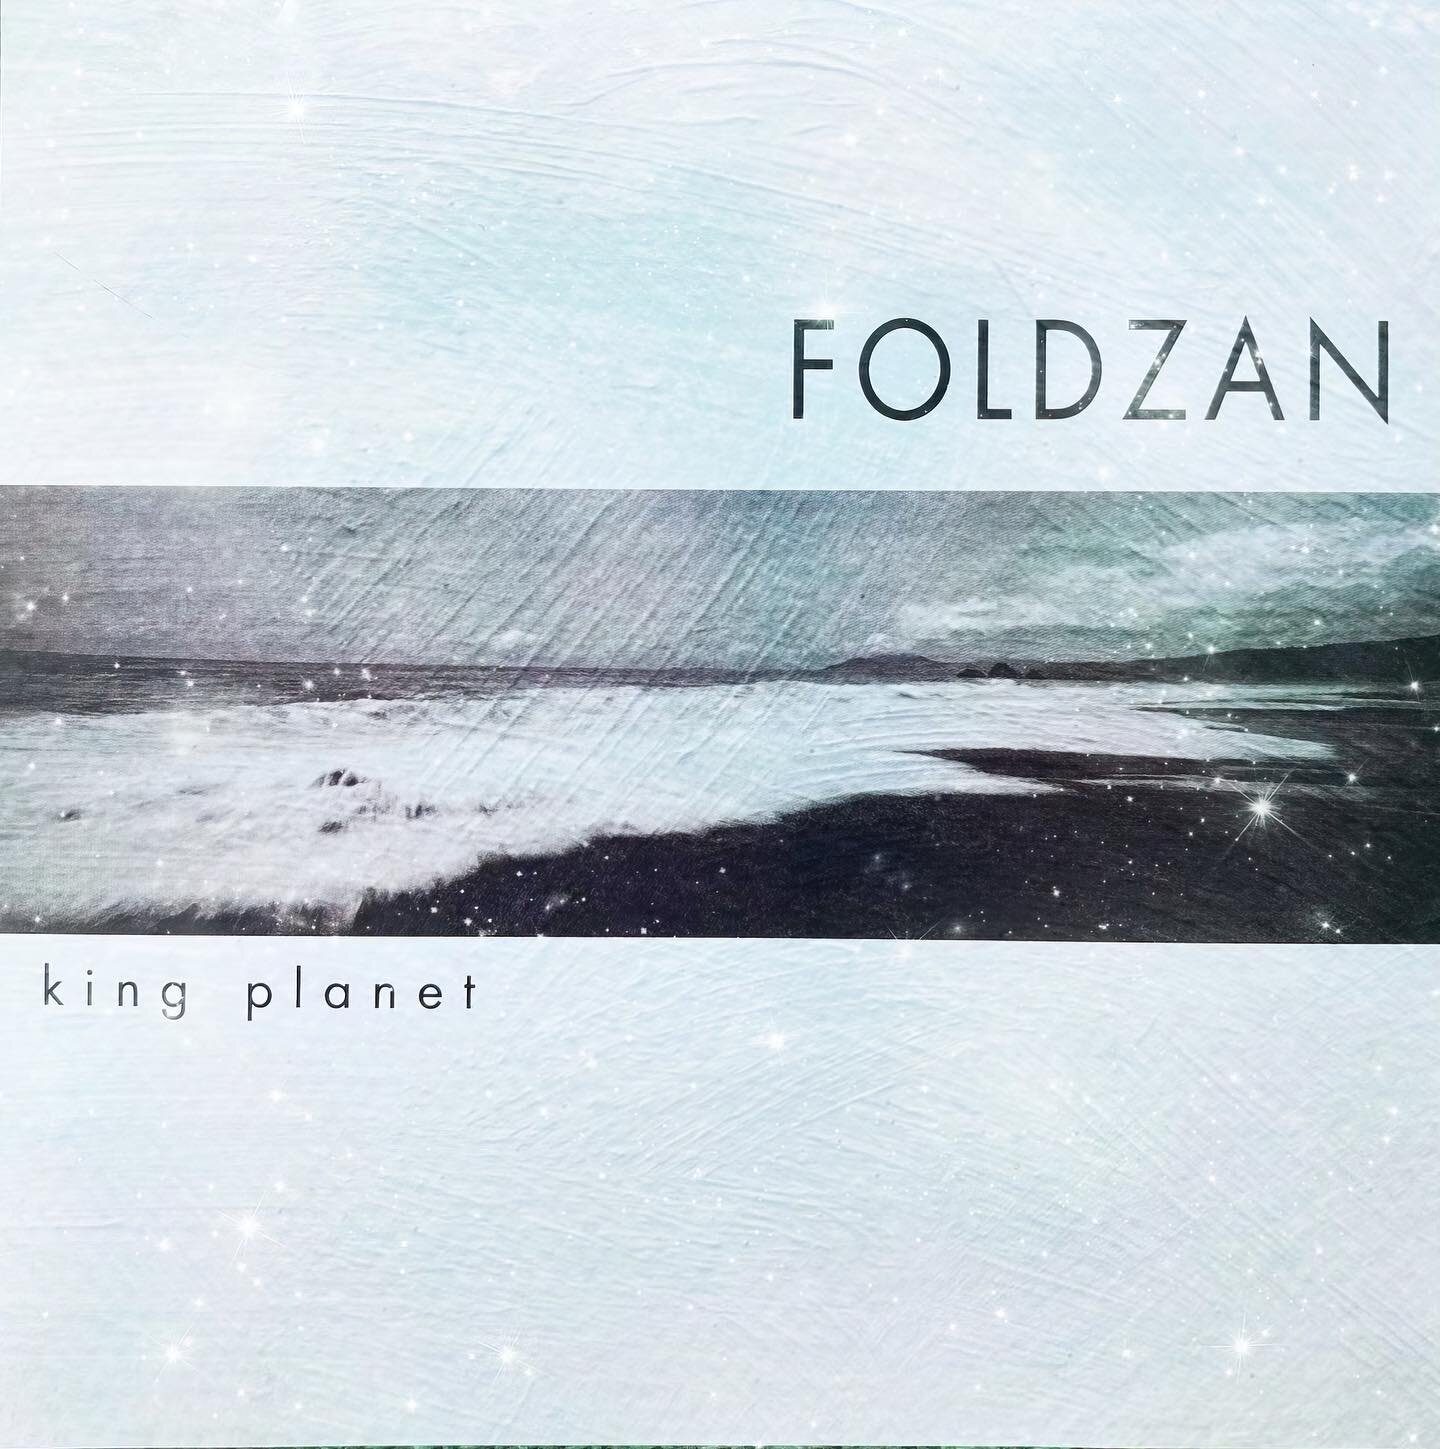 Surprise! Fold Zandura&rsquo;s &ldquo;King Planet&rdquo; is remastered and is now available on all streaming platforms. While &ldquo;Dark Divine&rdquo; was FZ&rsquo;s first album, this was the last album made. So excited for all of you guys to hear p